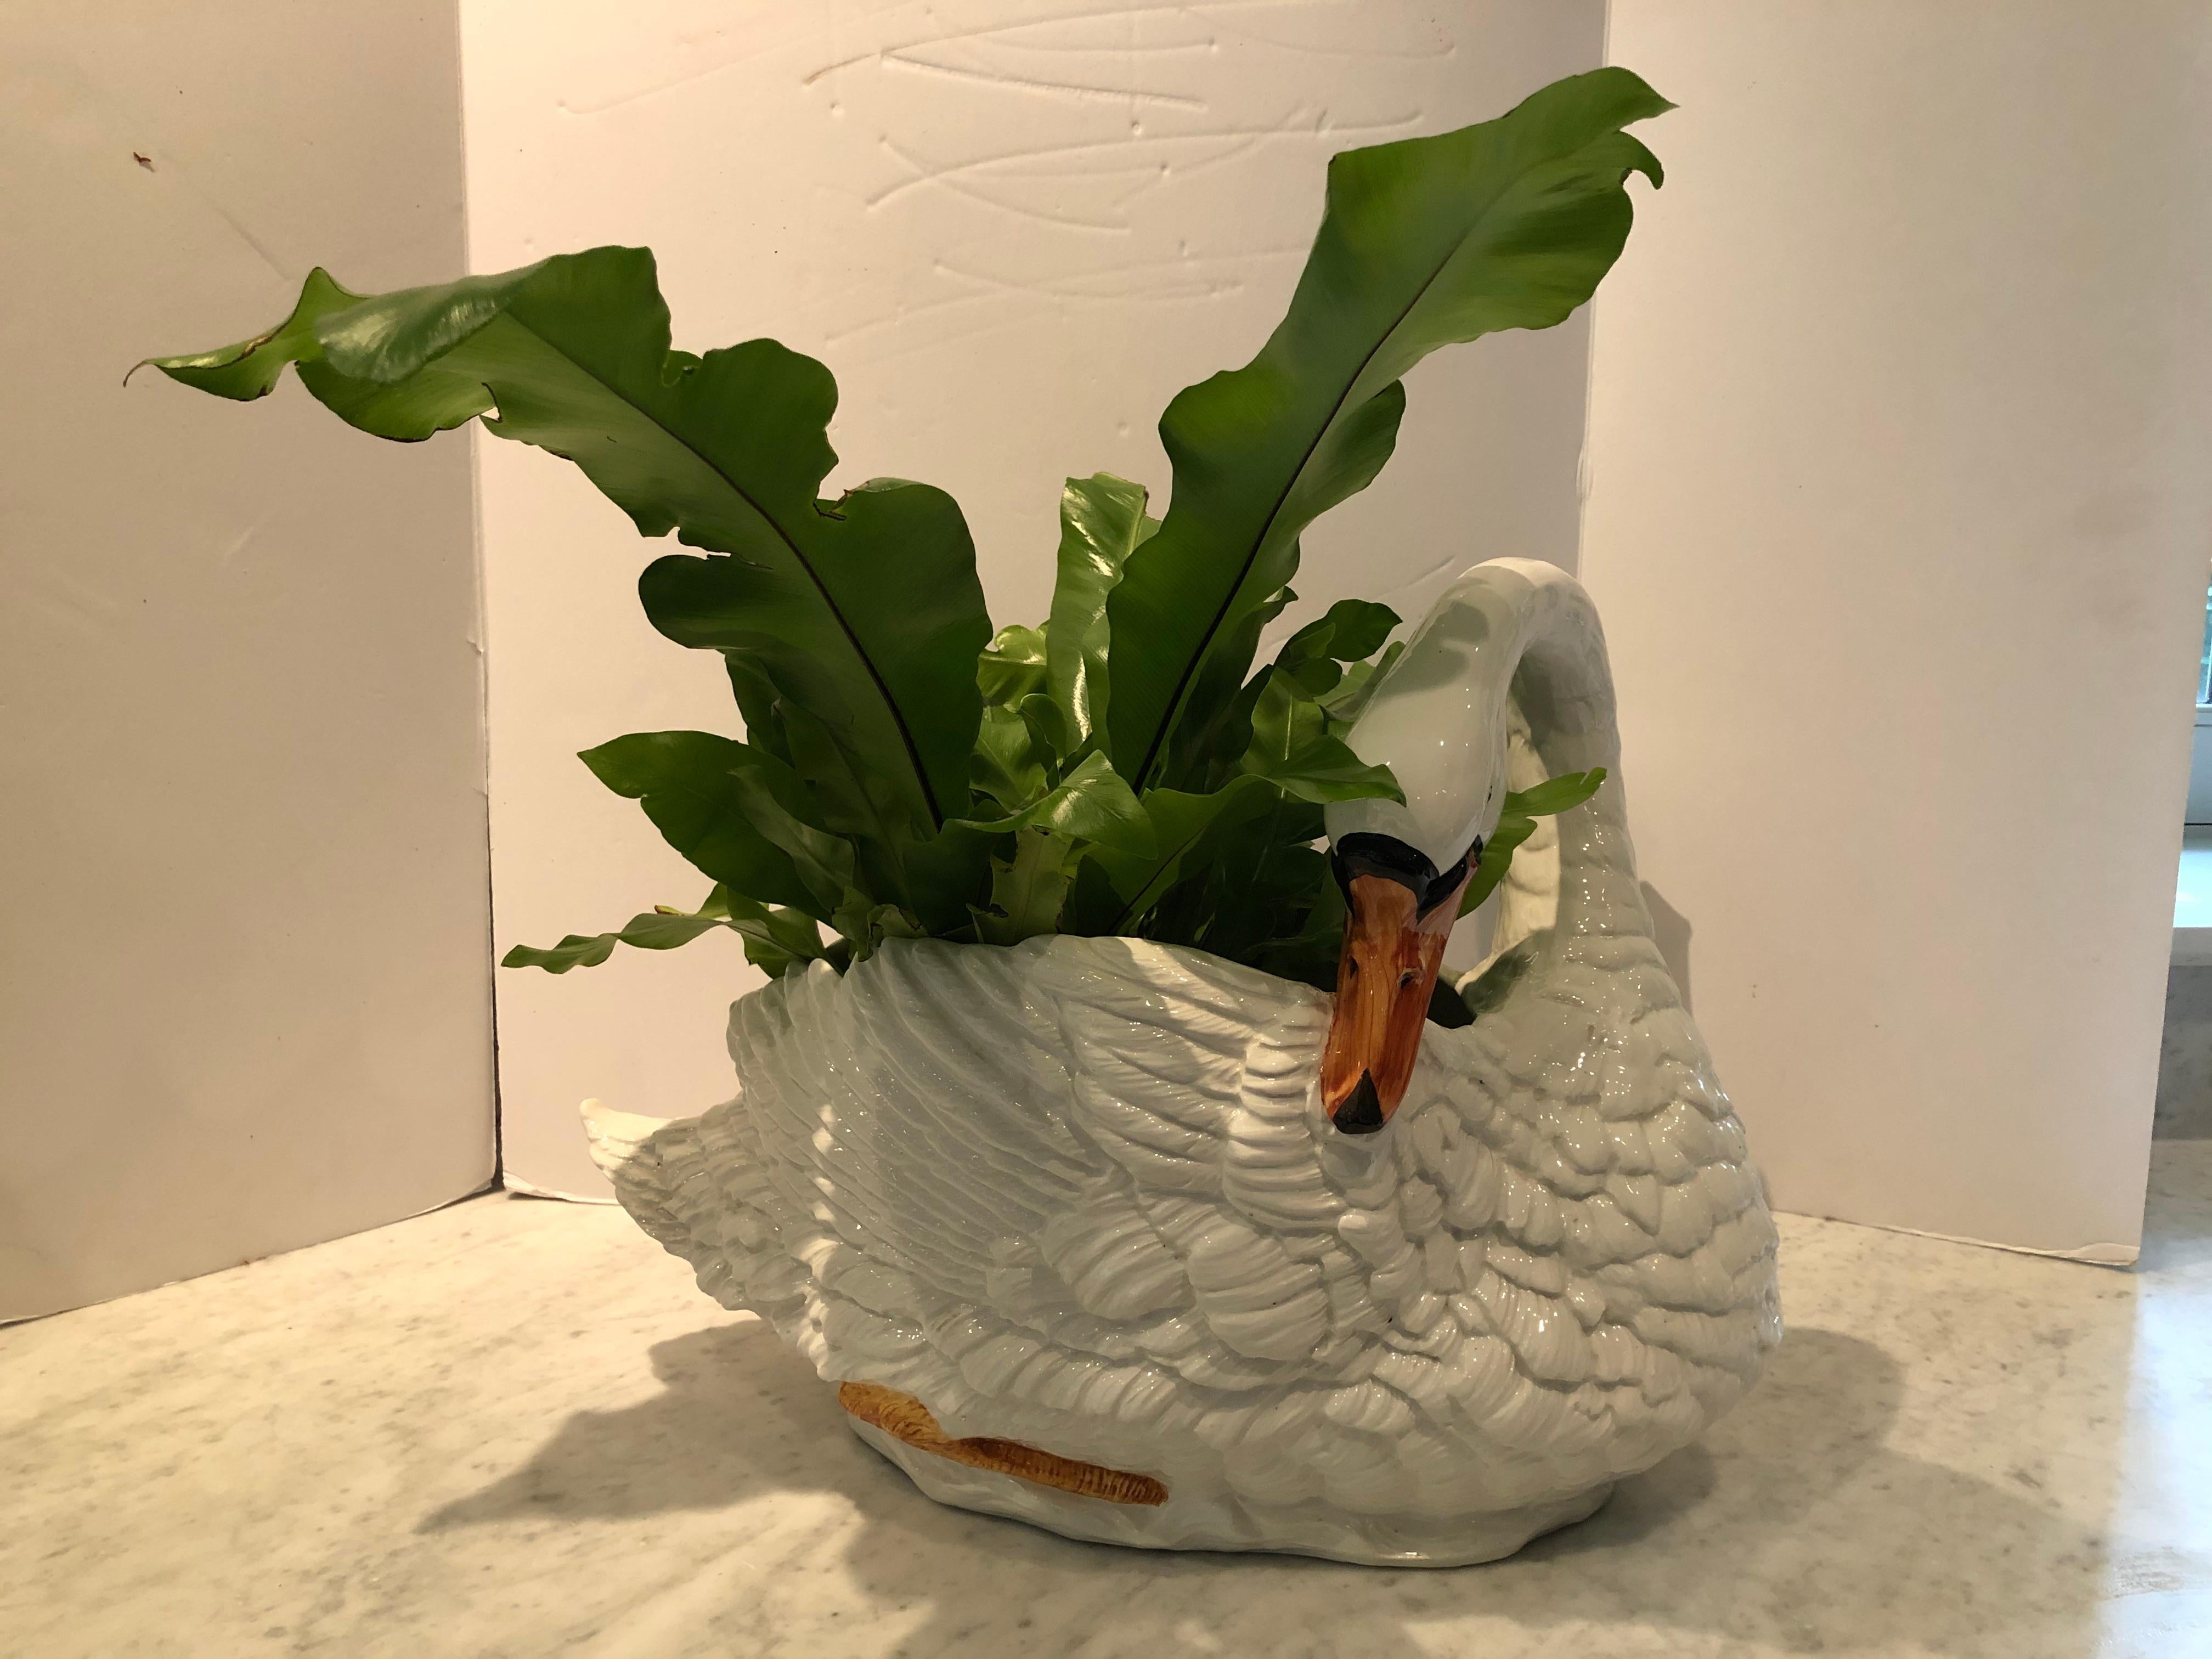 Elegant ceramic cachepot in a swan design by Chelsea House. The cachepot is large enough to make a statement as a centerpiece and has wonderful detail. Signed on the bottom. Measures 20” W x 10” D x 15” T. USA, 1990s, excellent condition. $1100.